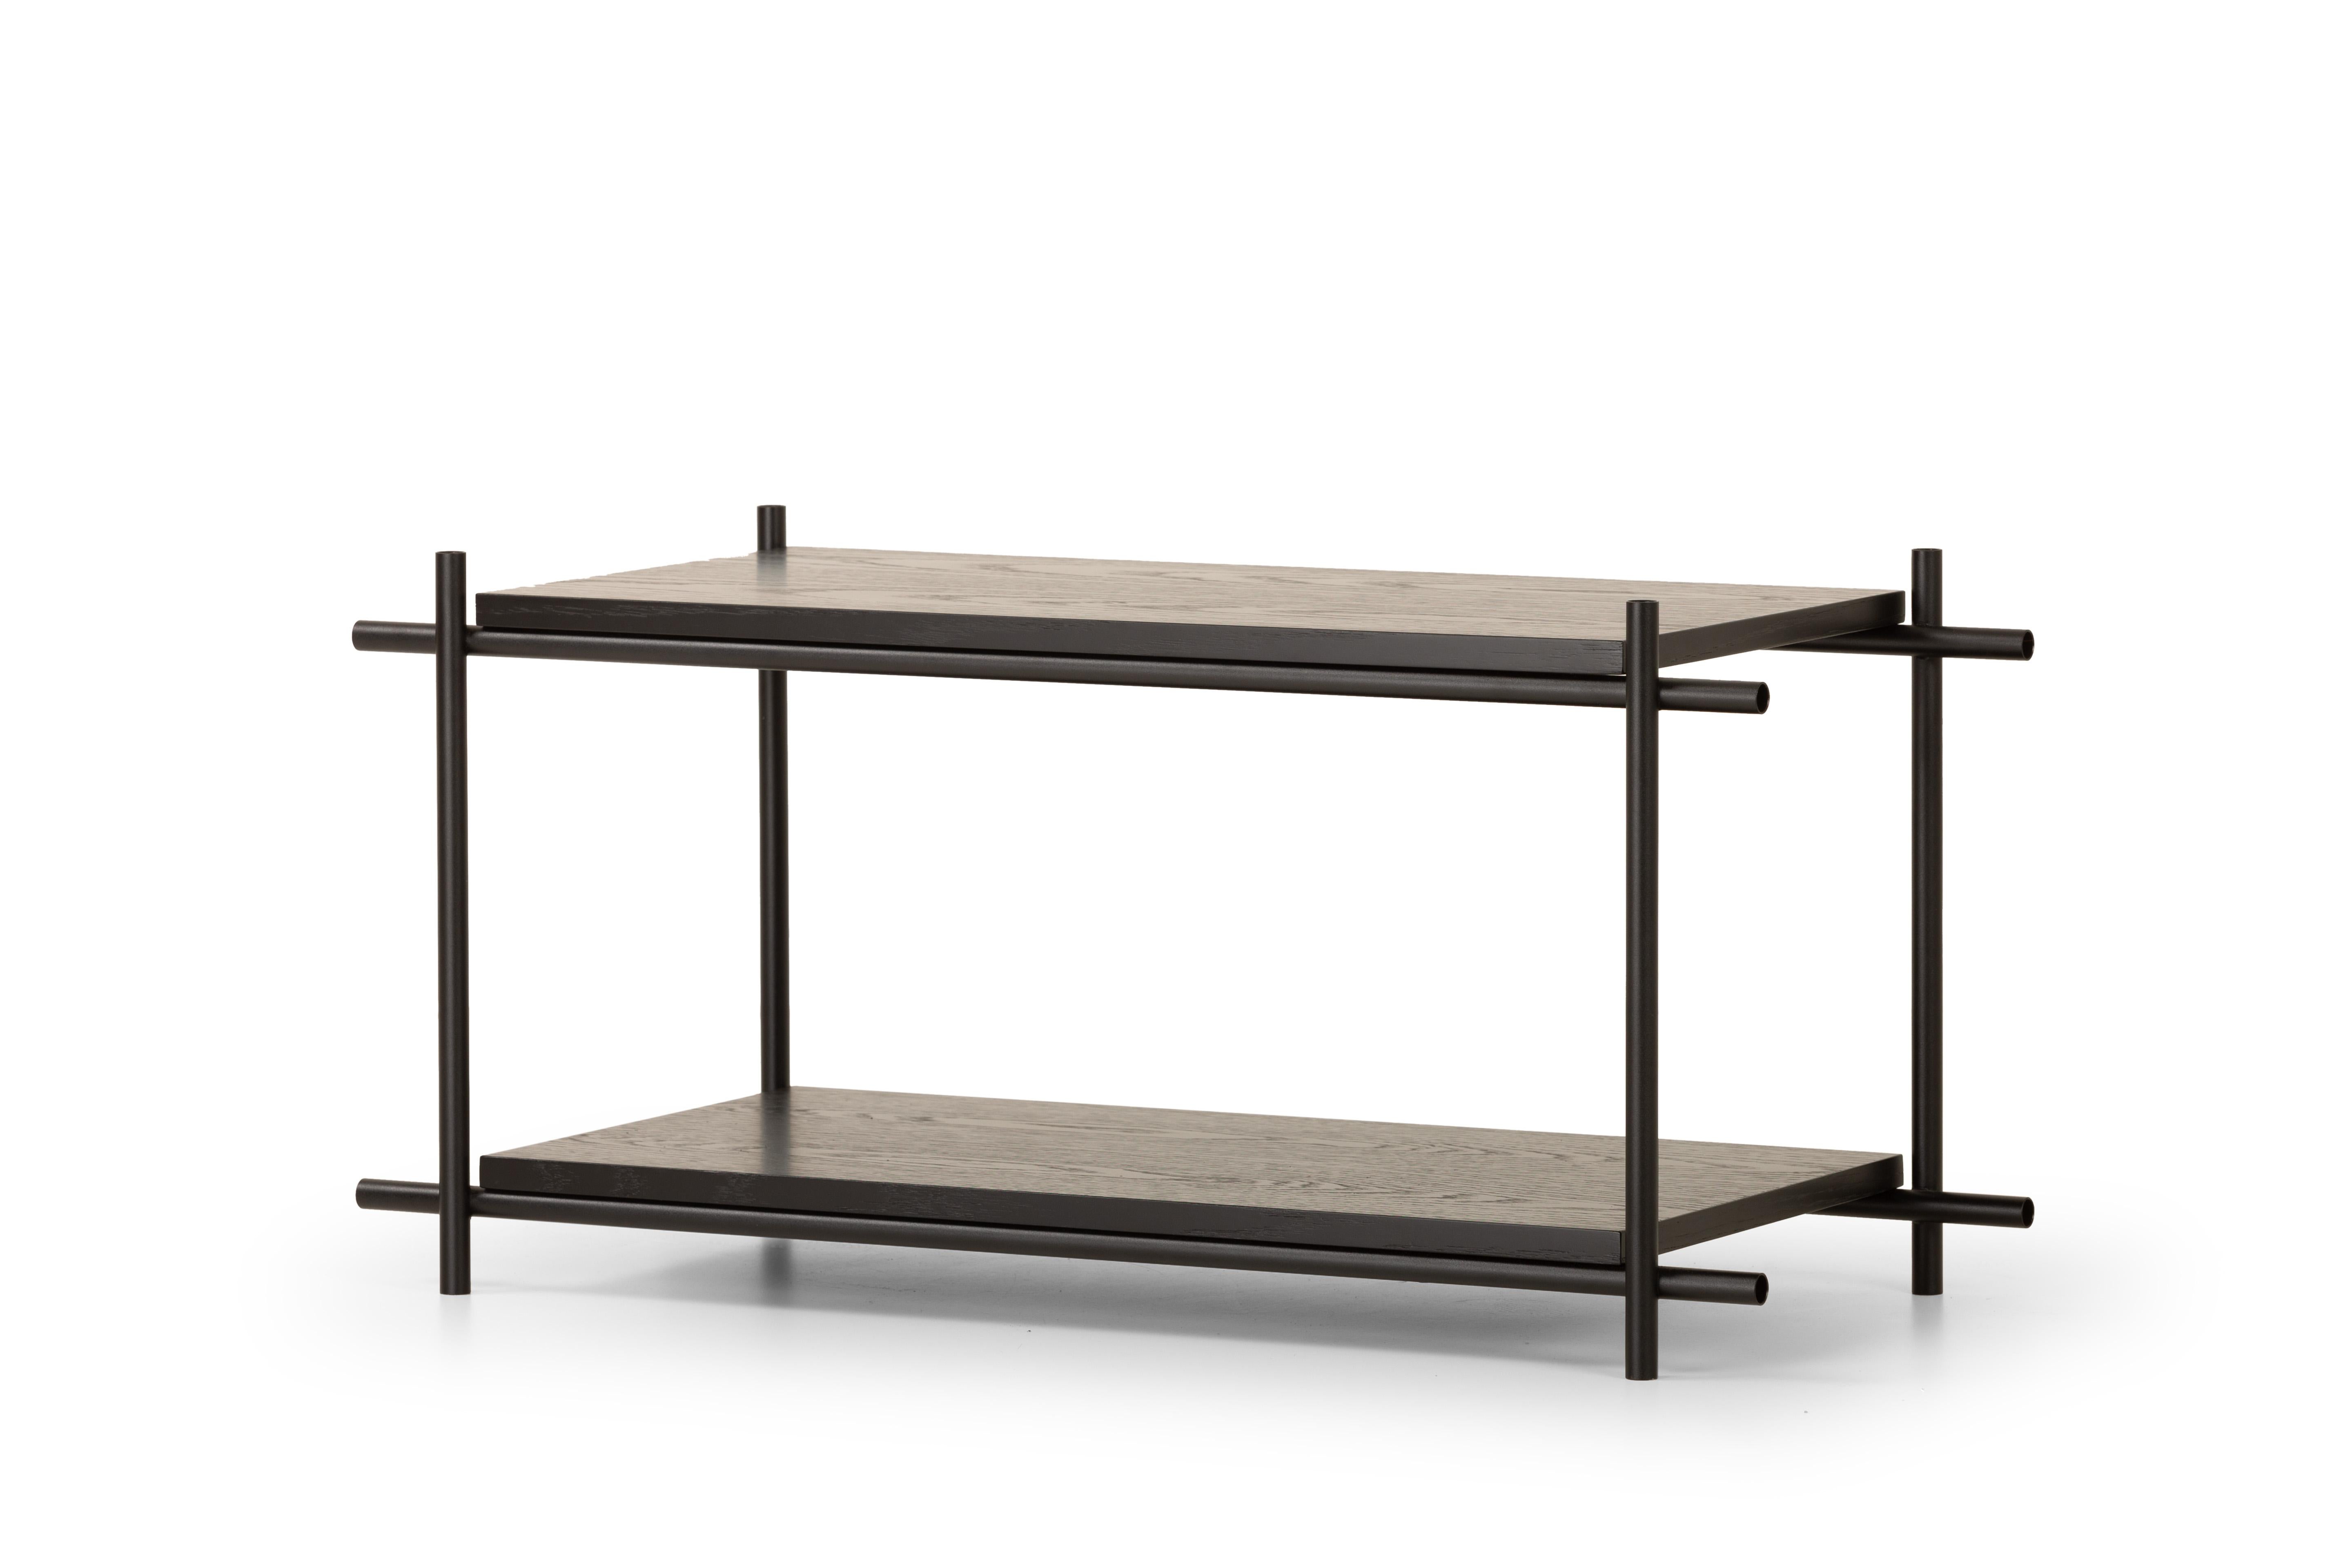 Innocent bookshelf single module by Mingardo
Dimensions: D90 x W39 x H43 cm 
Materials: RAL 9005 black varnished iron structure, shelf in black stained oak
Weight: 30 kg

Also available in different dimensions. 

The Innocent project is